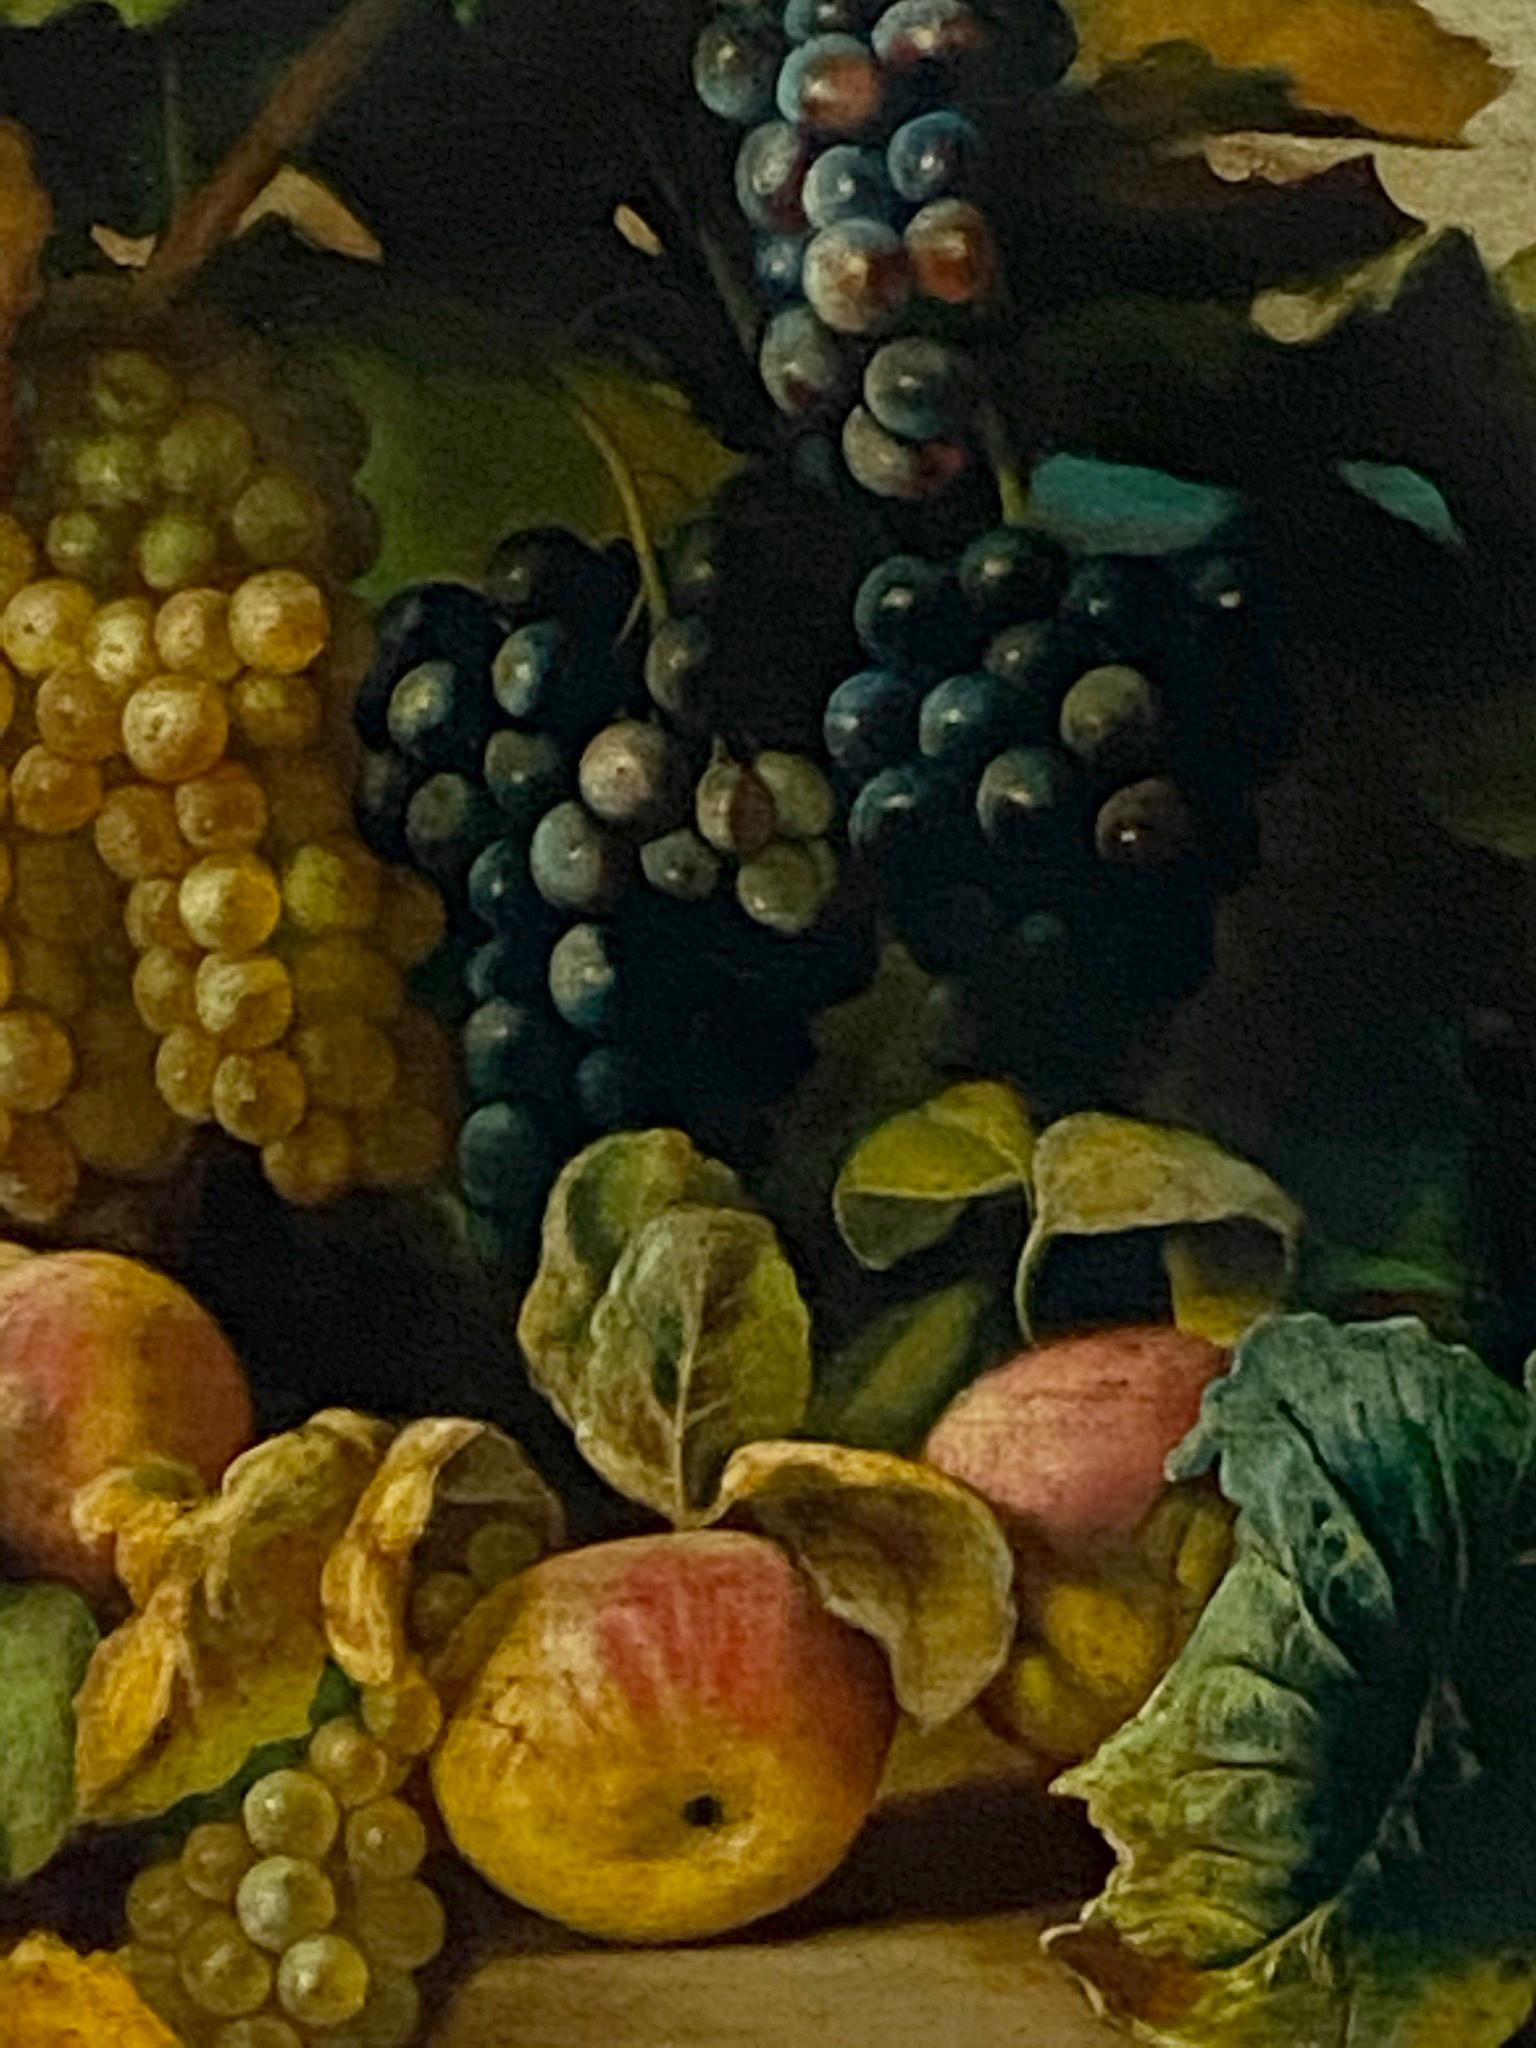 STILL LIFE - Oil on canvas cm.80x60 by Maximilian Ciccone, Italy 2002.

in this oil on canvas painting the painter Ciccone draws inspiration from the painting of the Neapolitan school of the early seventeenth century which had as one of the major